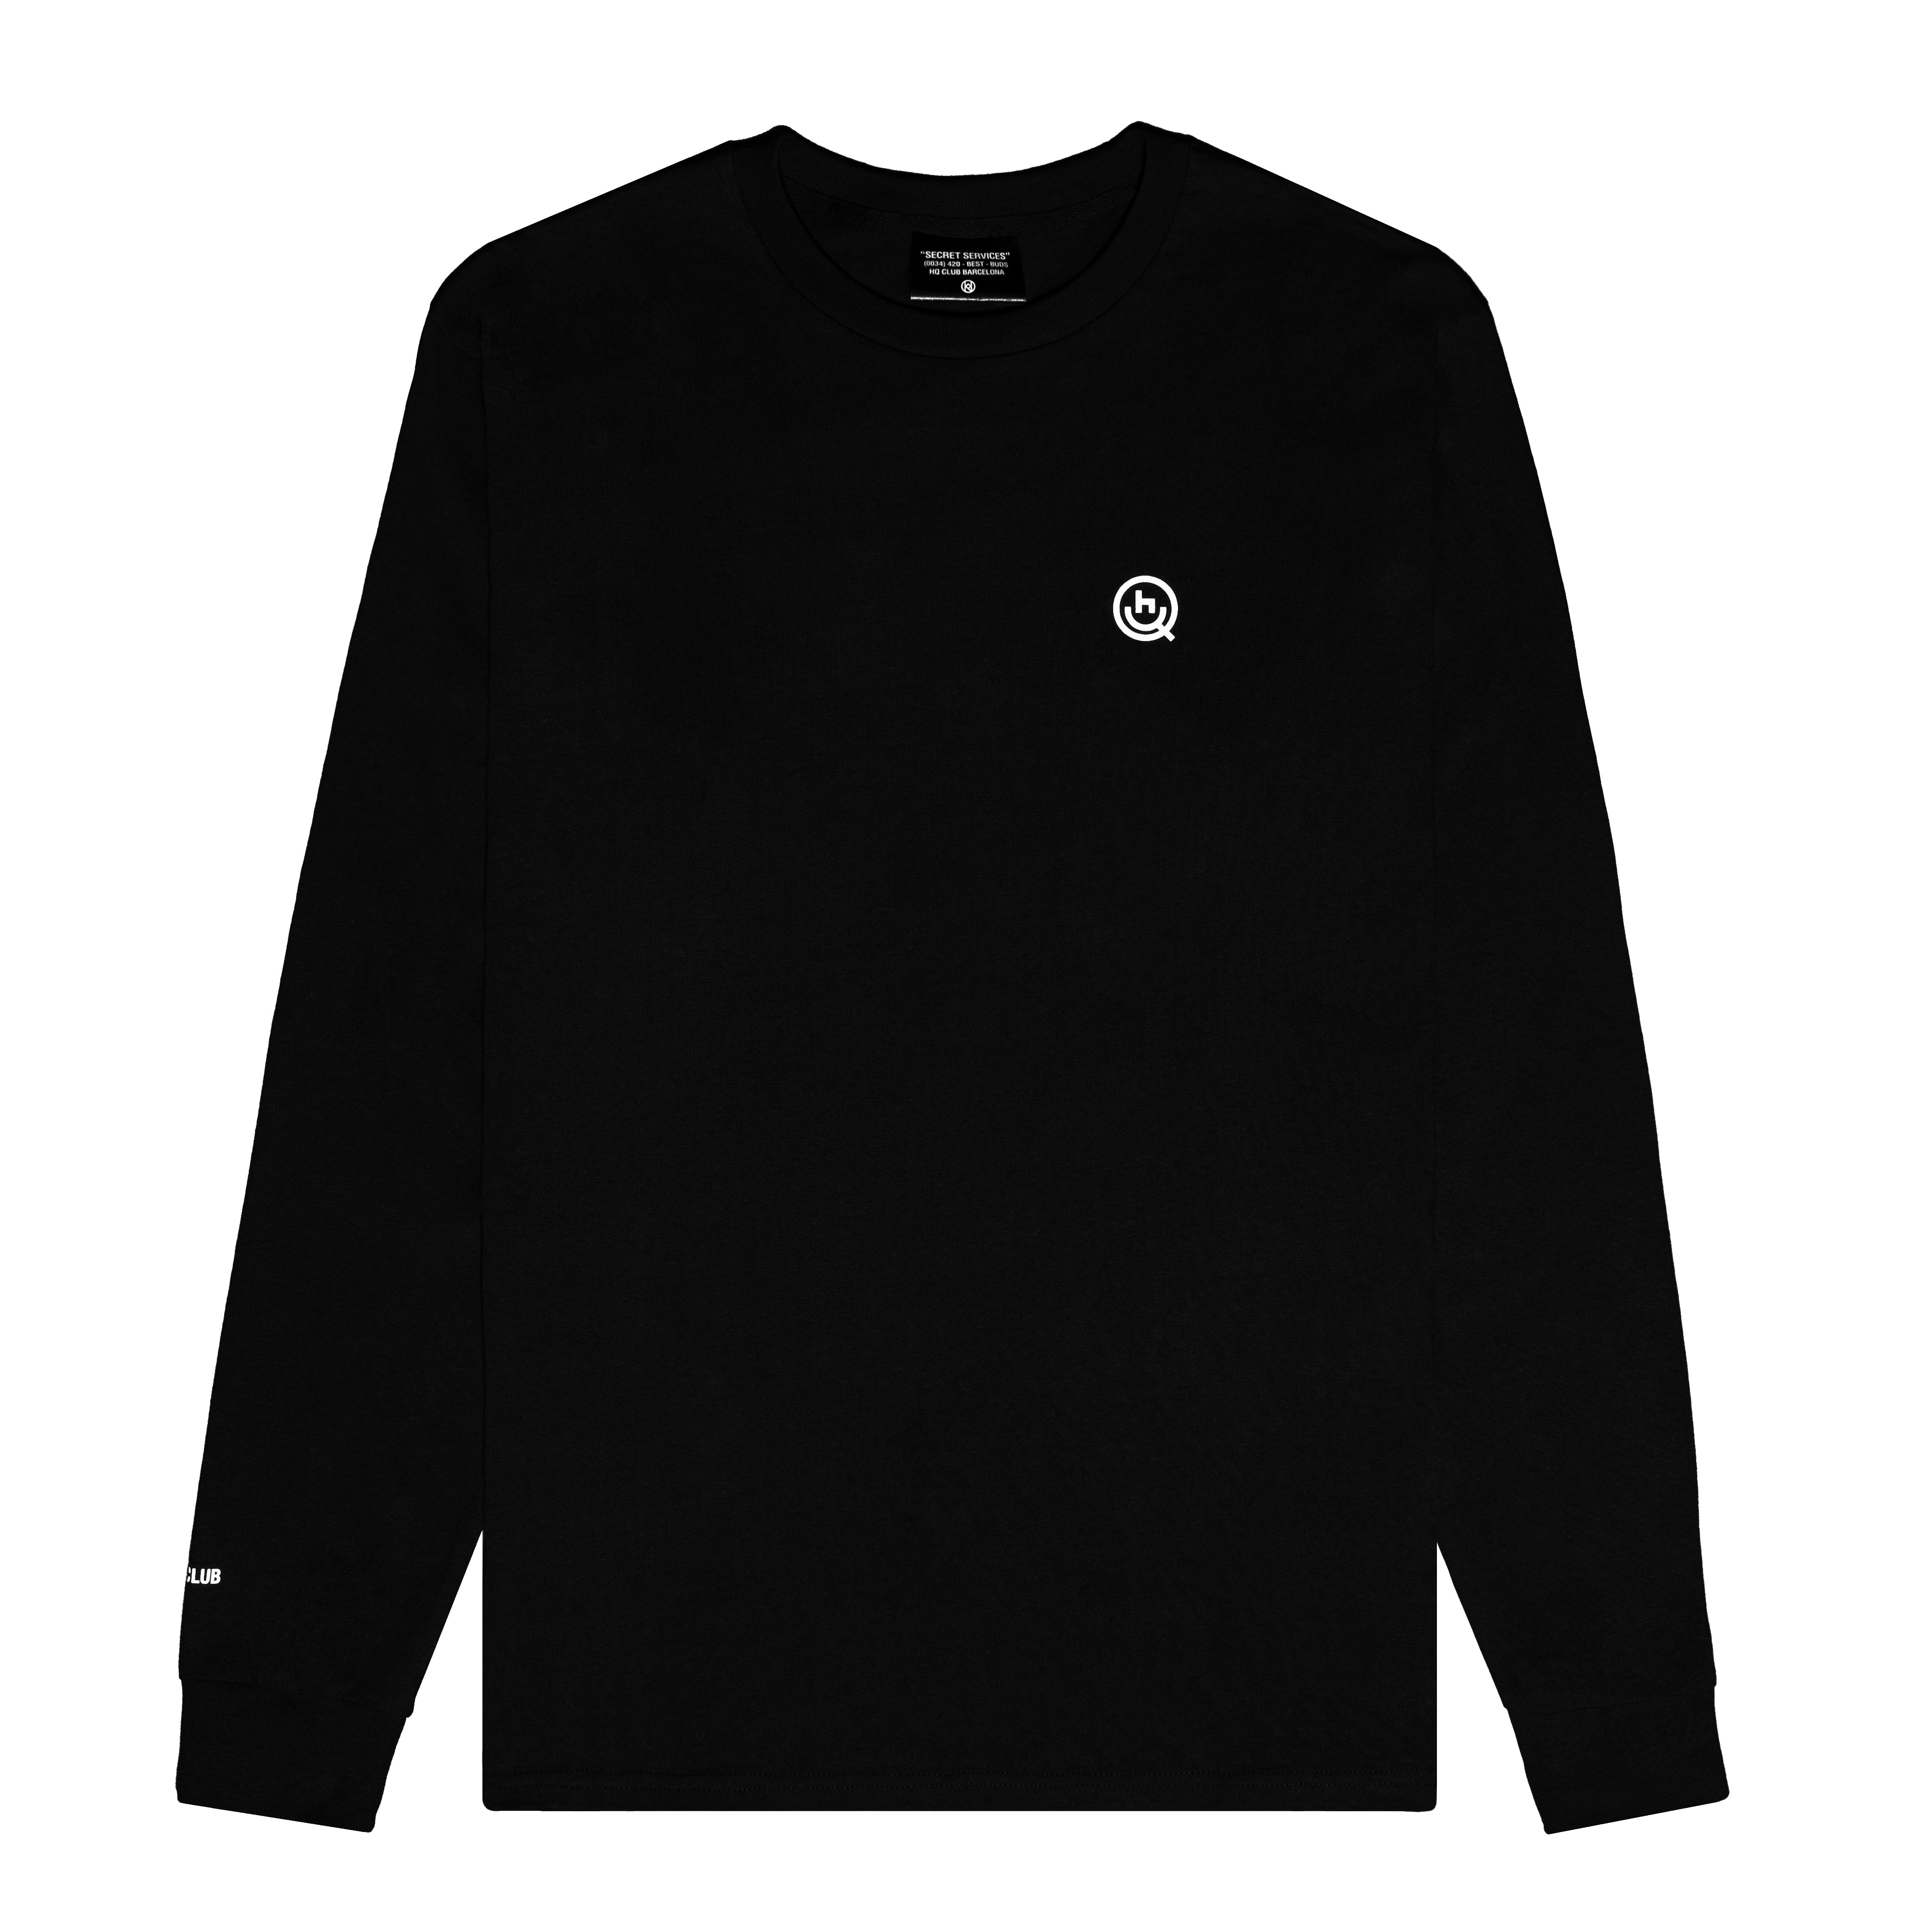 IF YOU KNOW YOU KNOW LONGSLEEVE BLACK